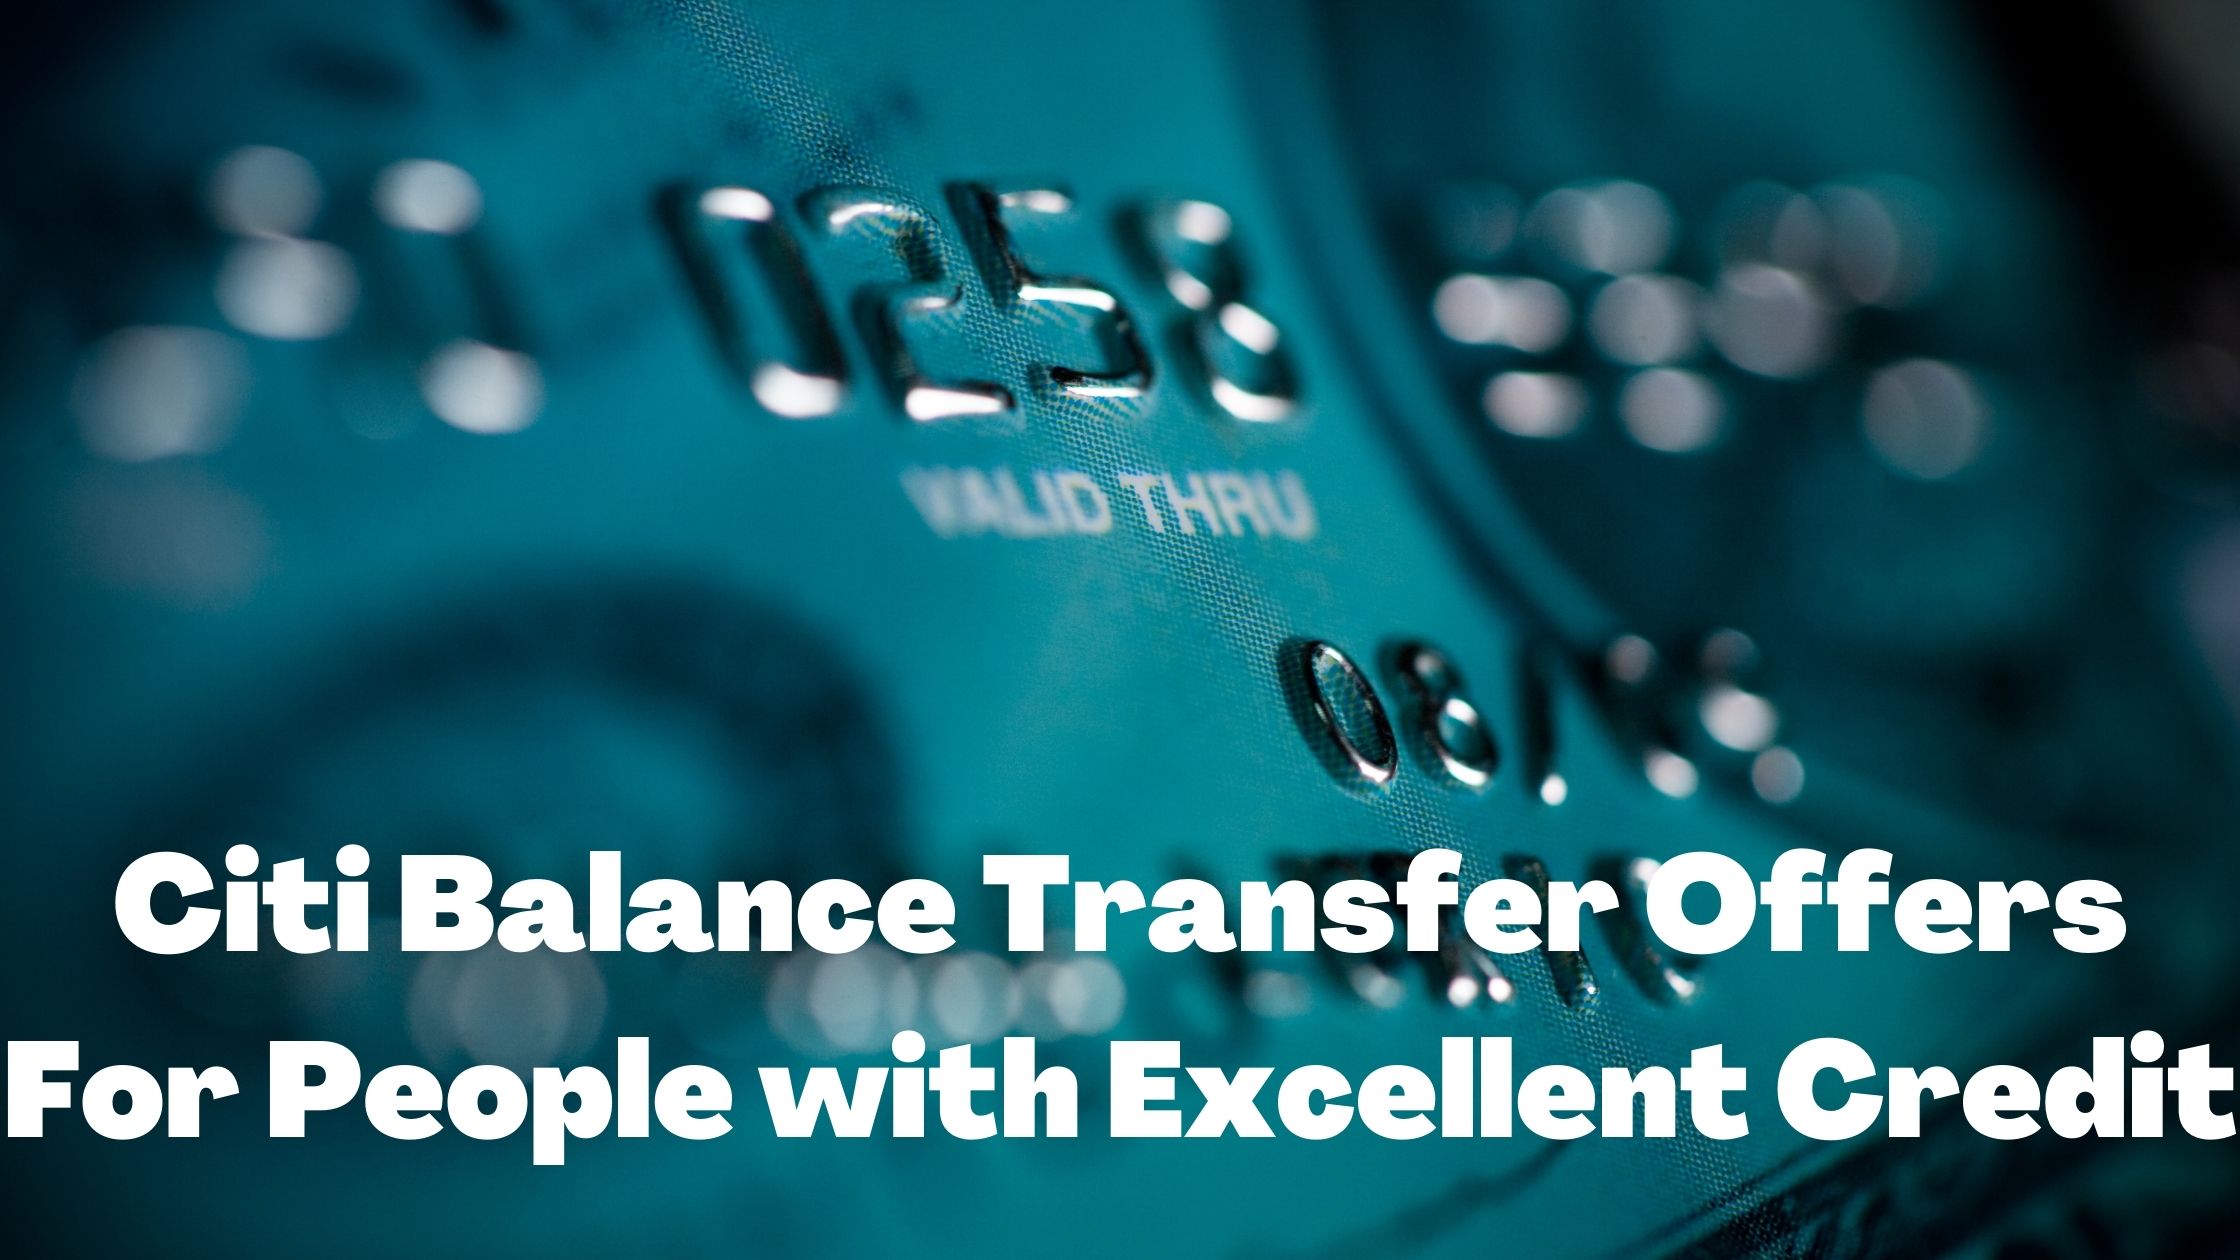 What are the Different Types of Citi Balance Transfer Offers?